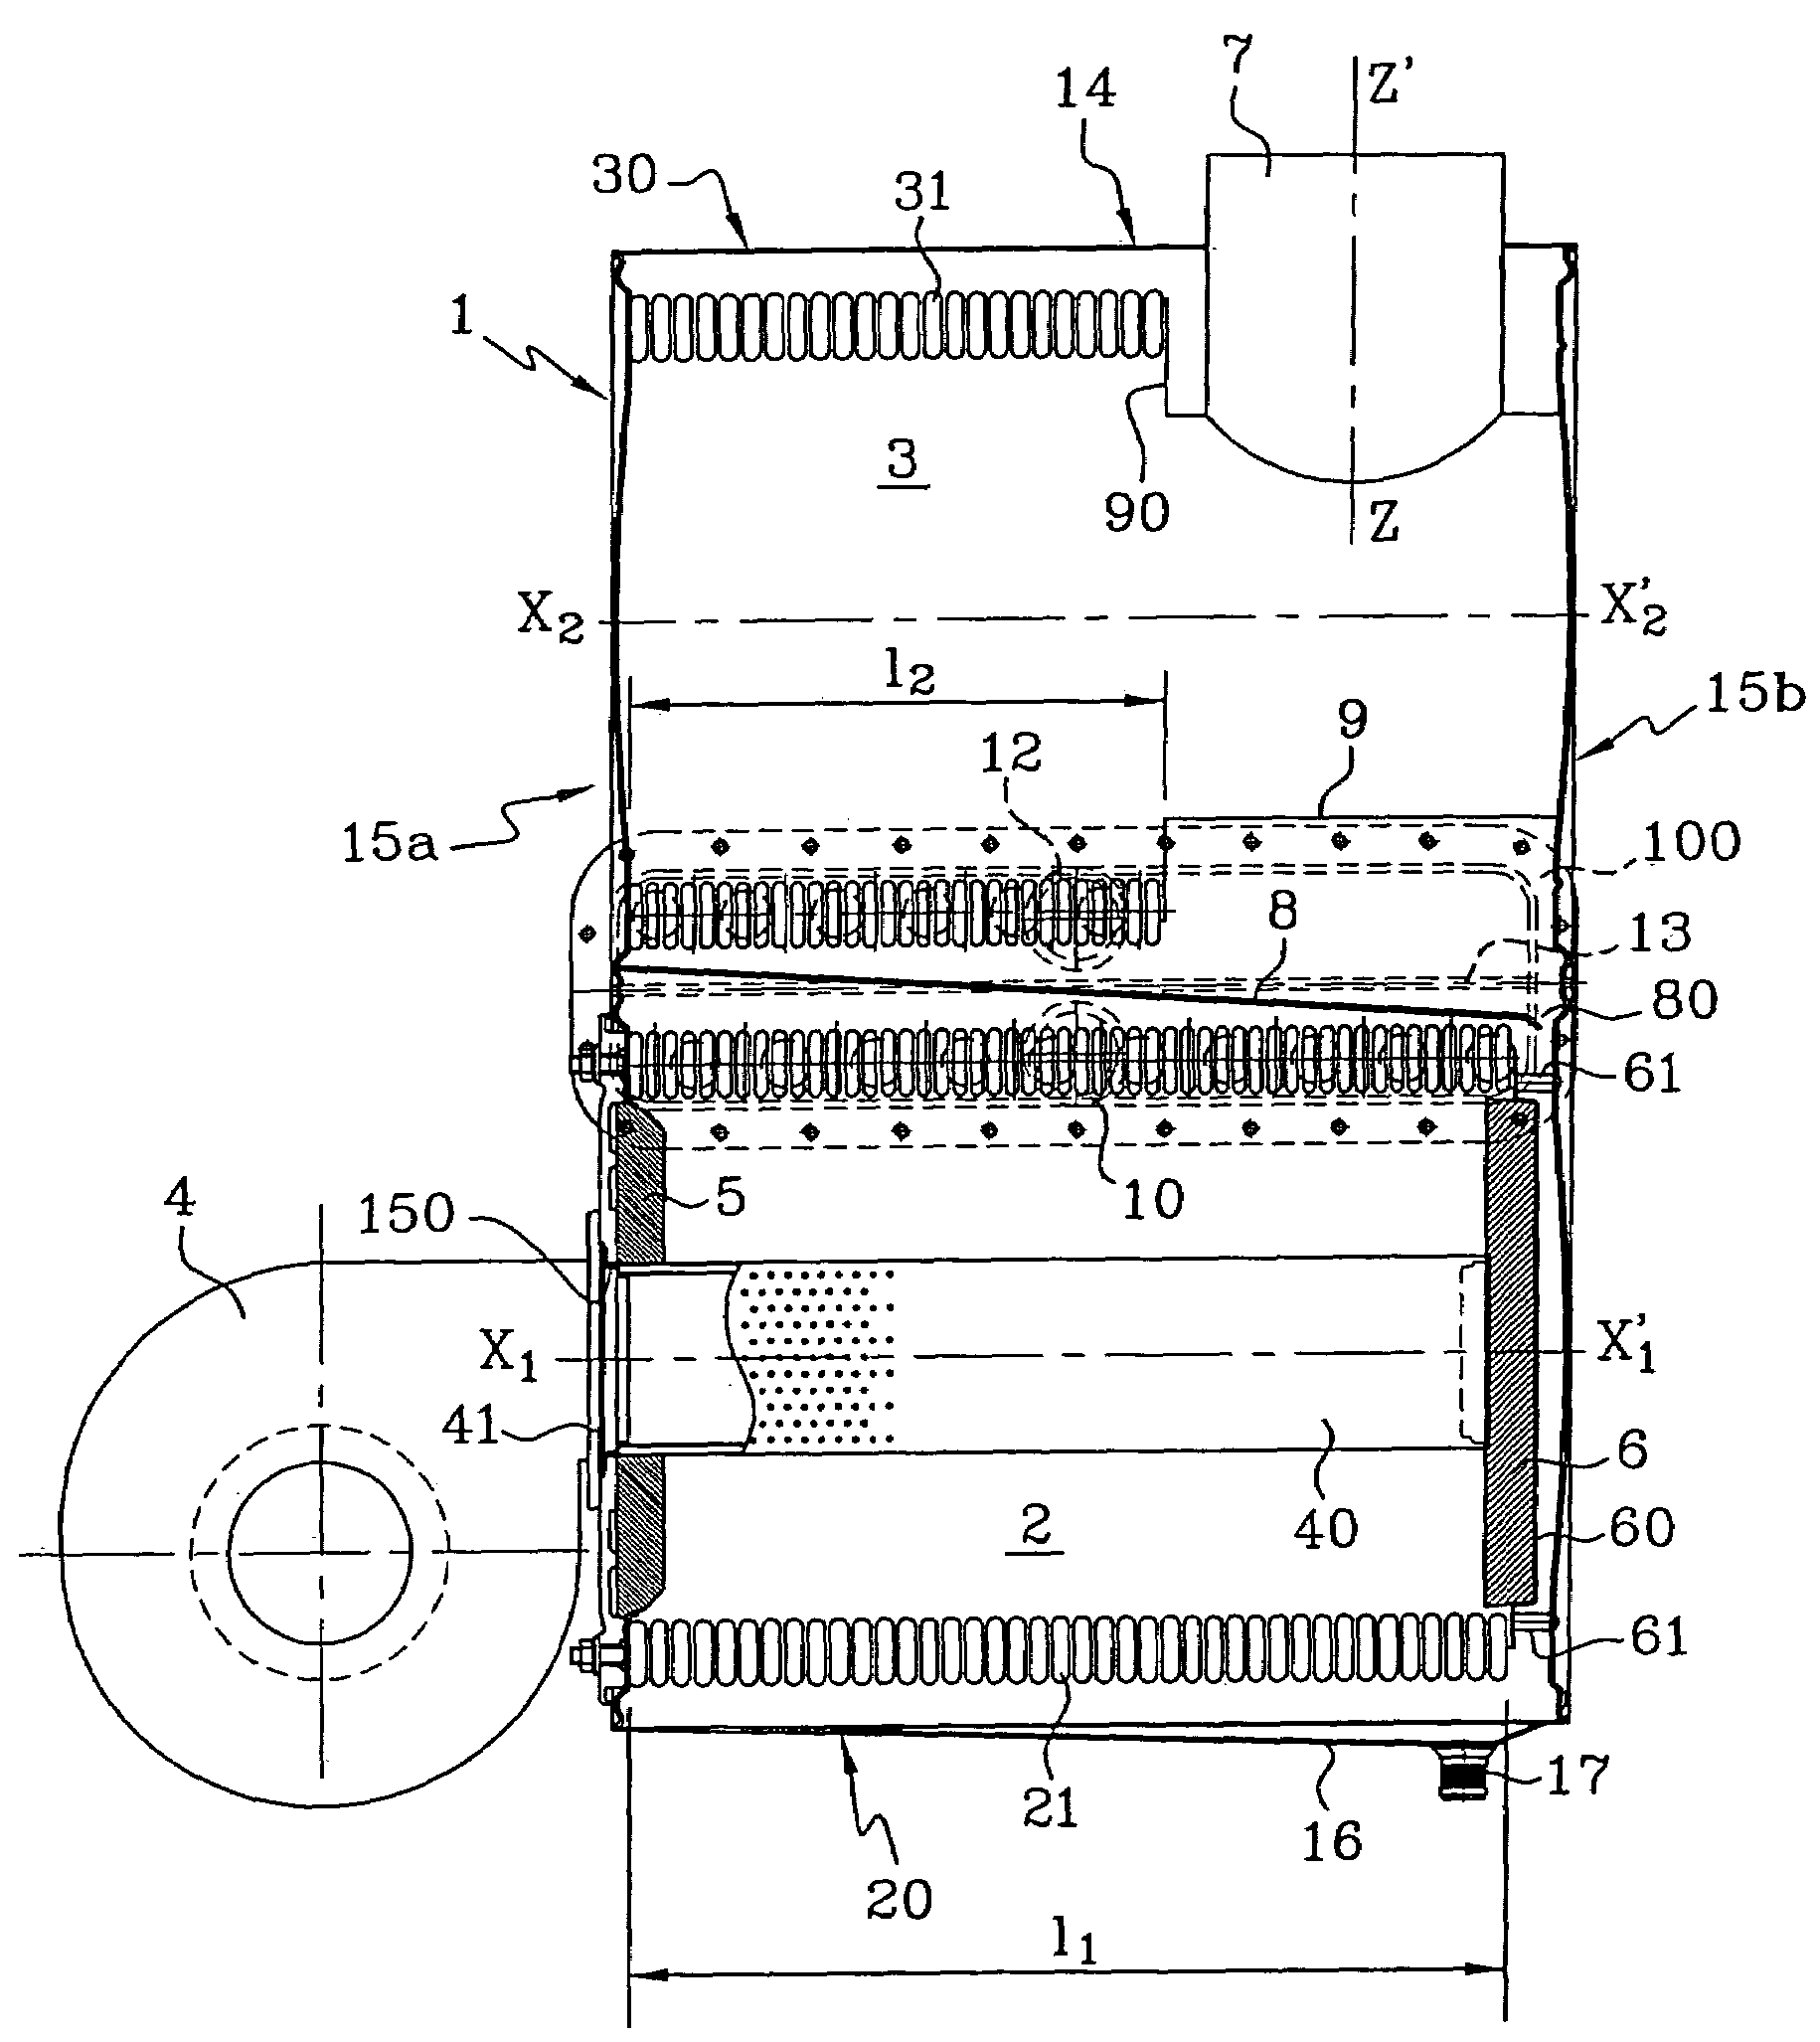 Condensing heat exchanger with double bundle of tubes